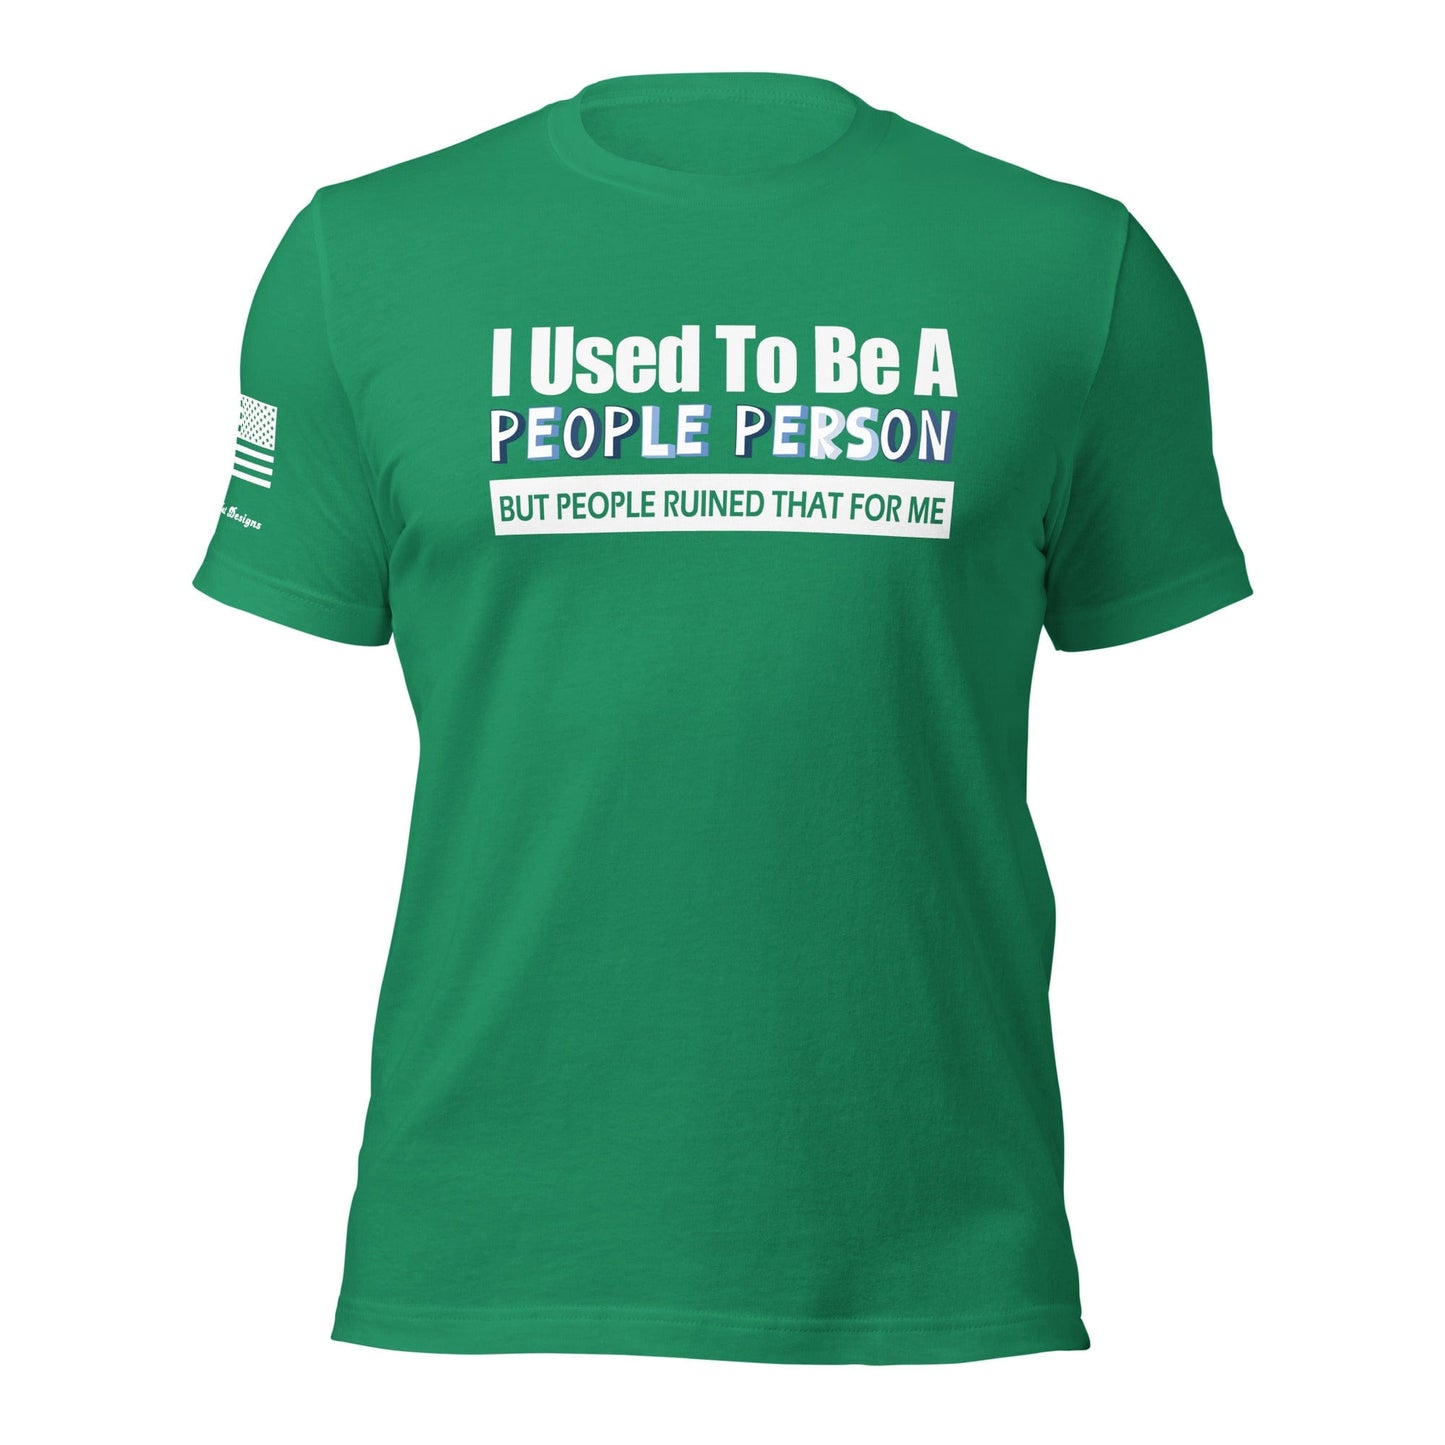 FreedomKat Designs, LLC Kelly / S I used to be a people person t-shirt